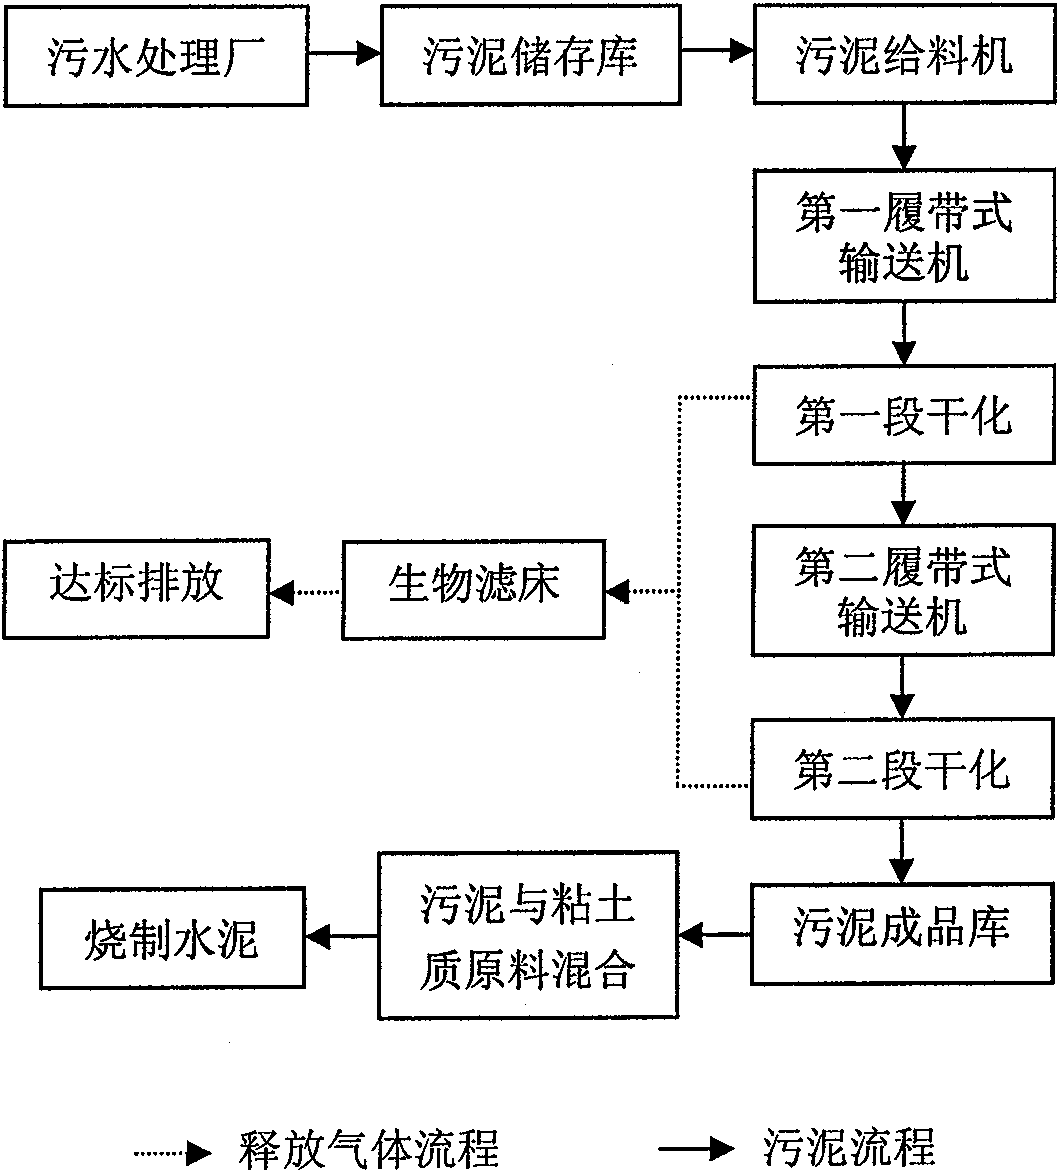 System for drying sludge by utilizing radiation heat of rotary cement kiln